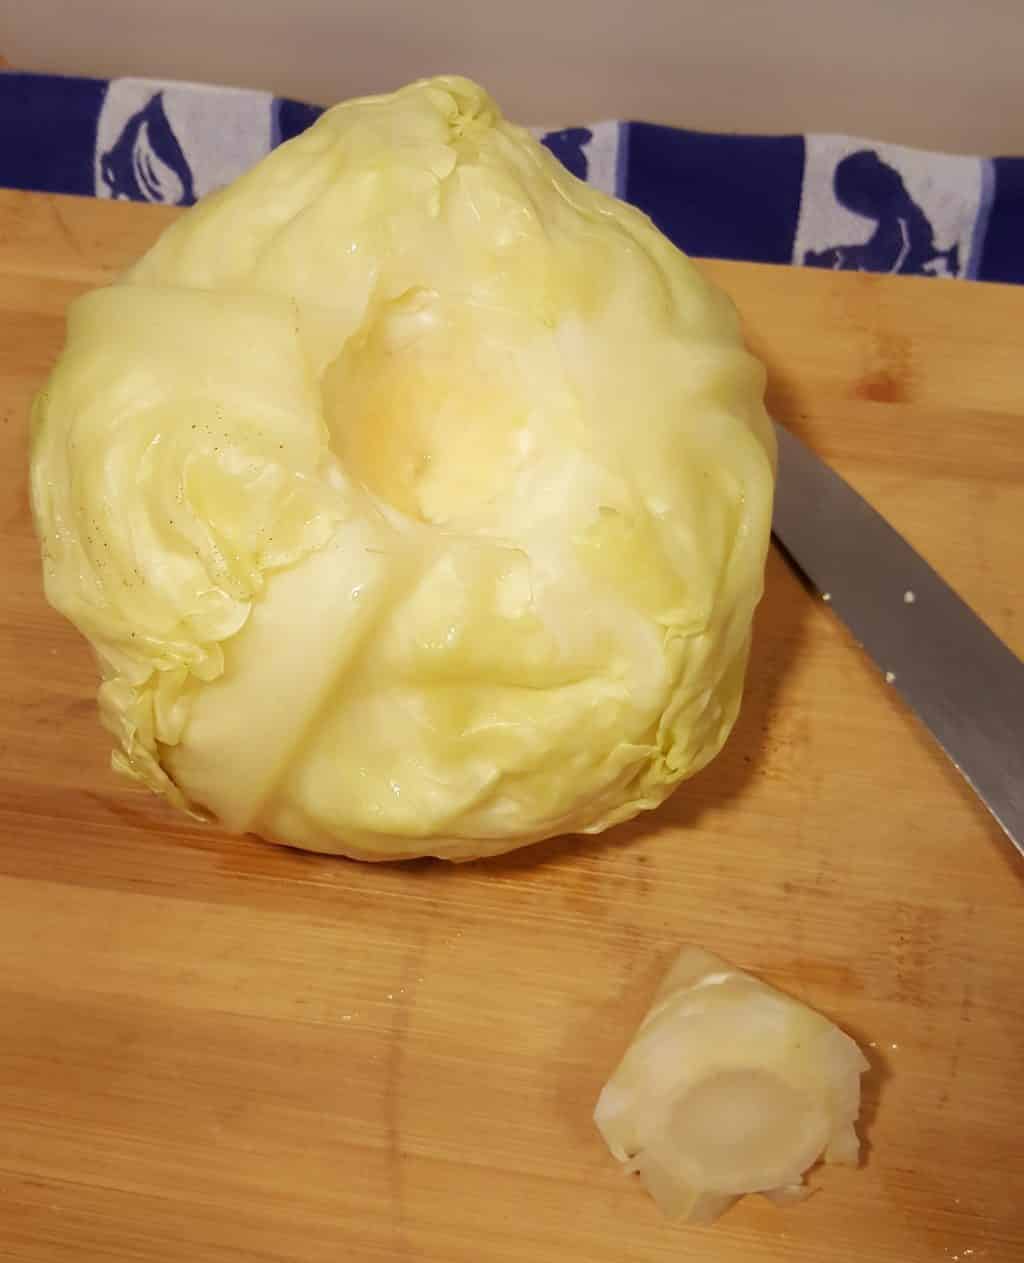 Cook the Cabbage and Remove the Core